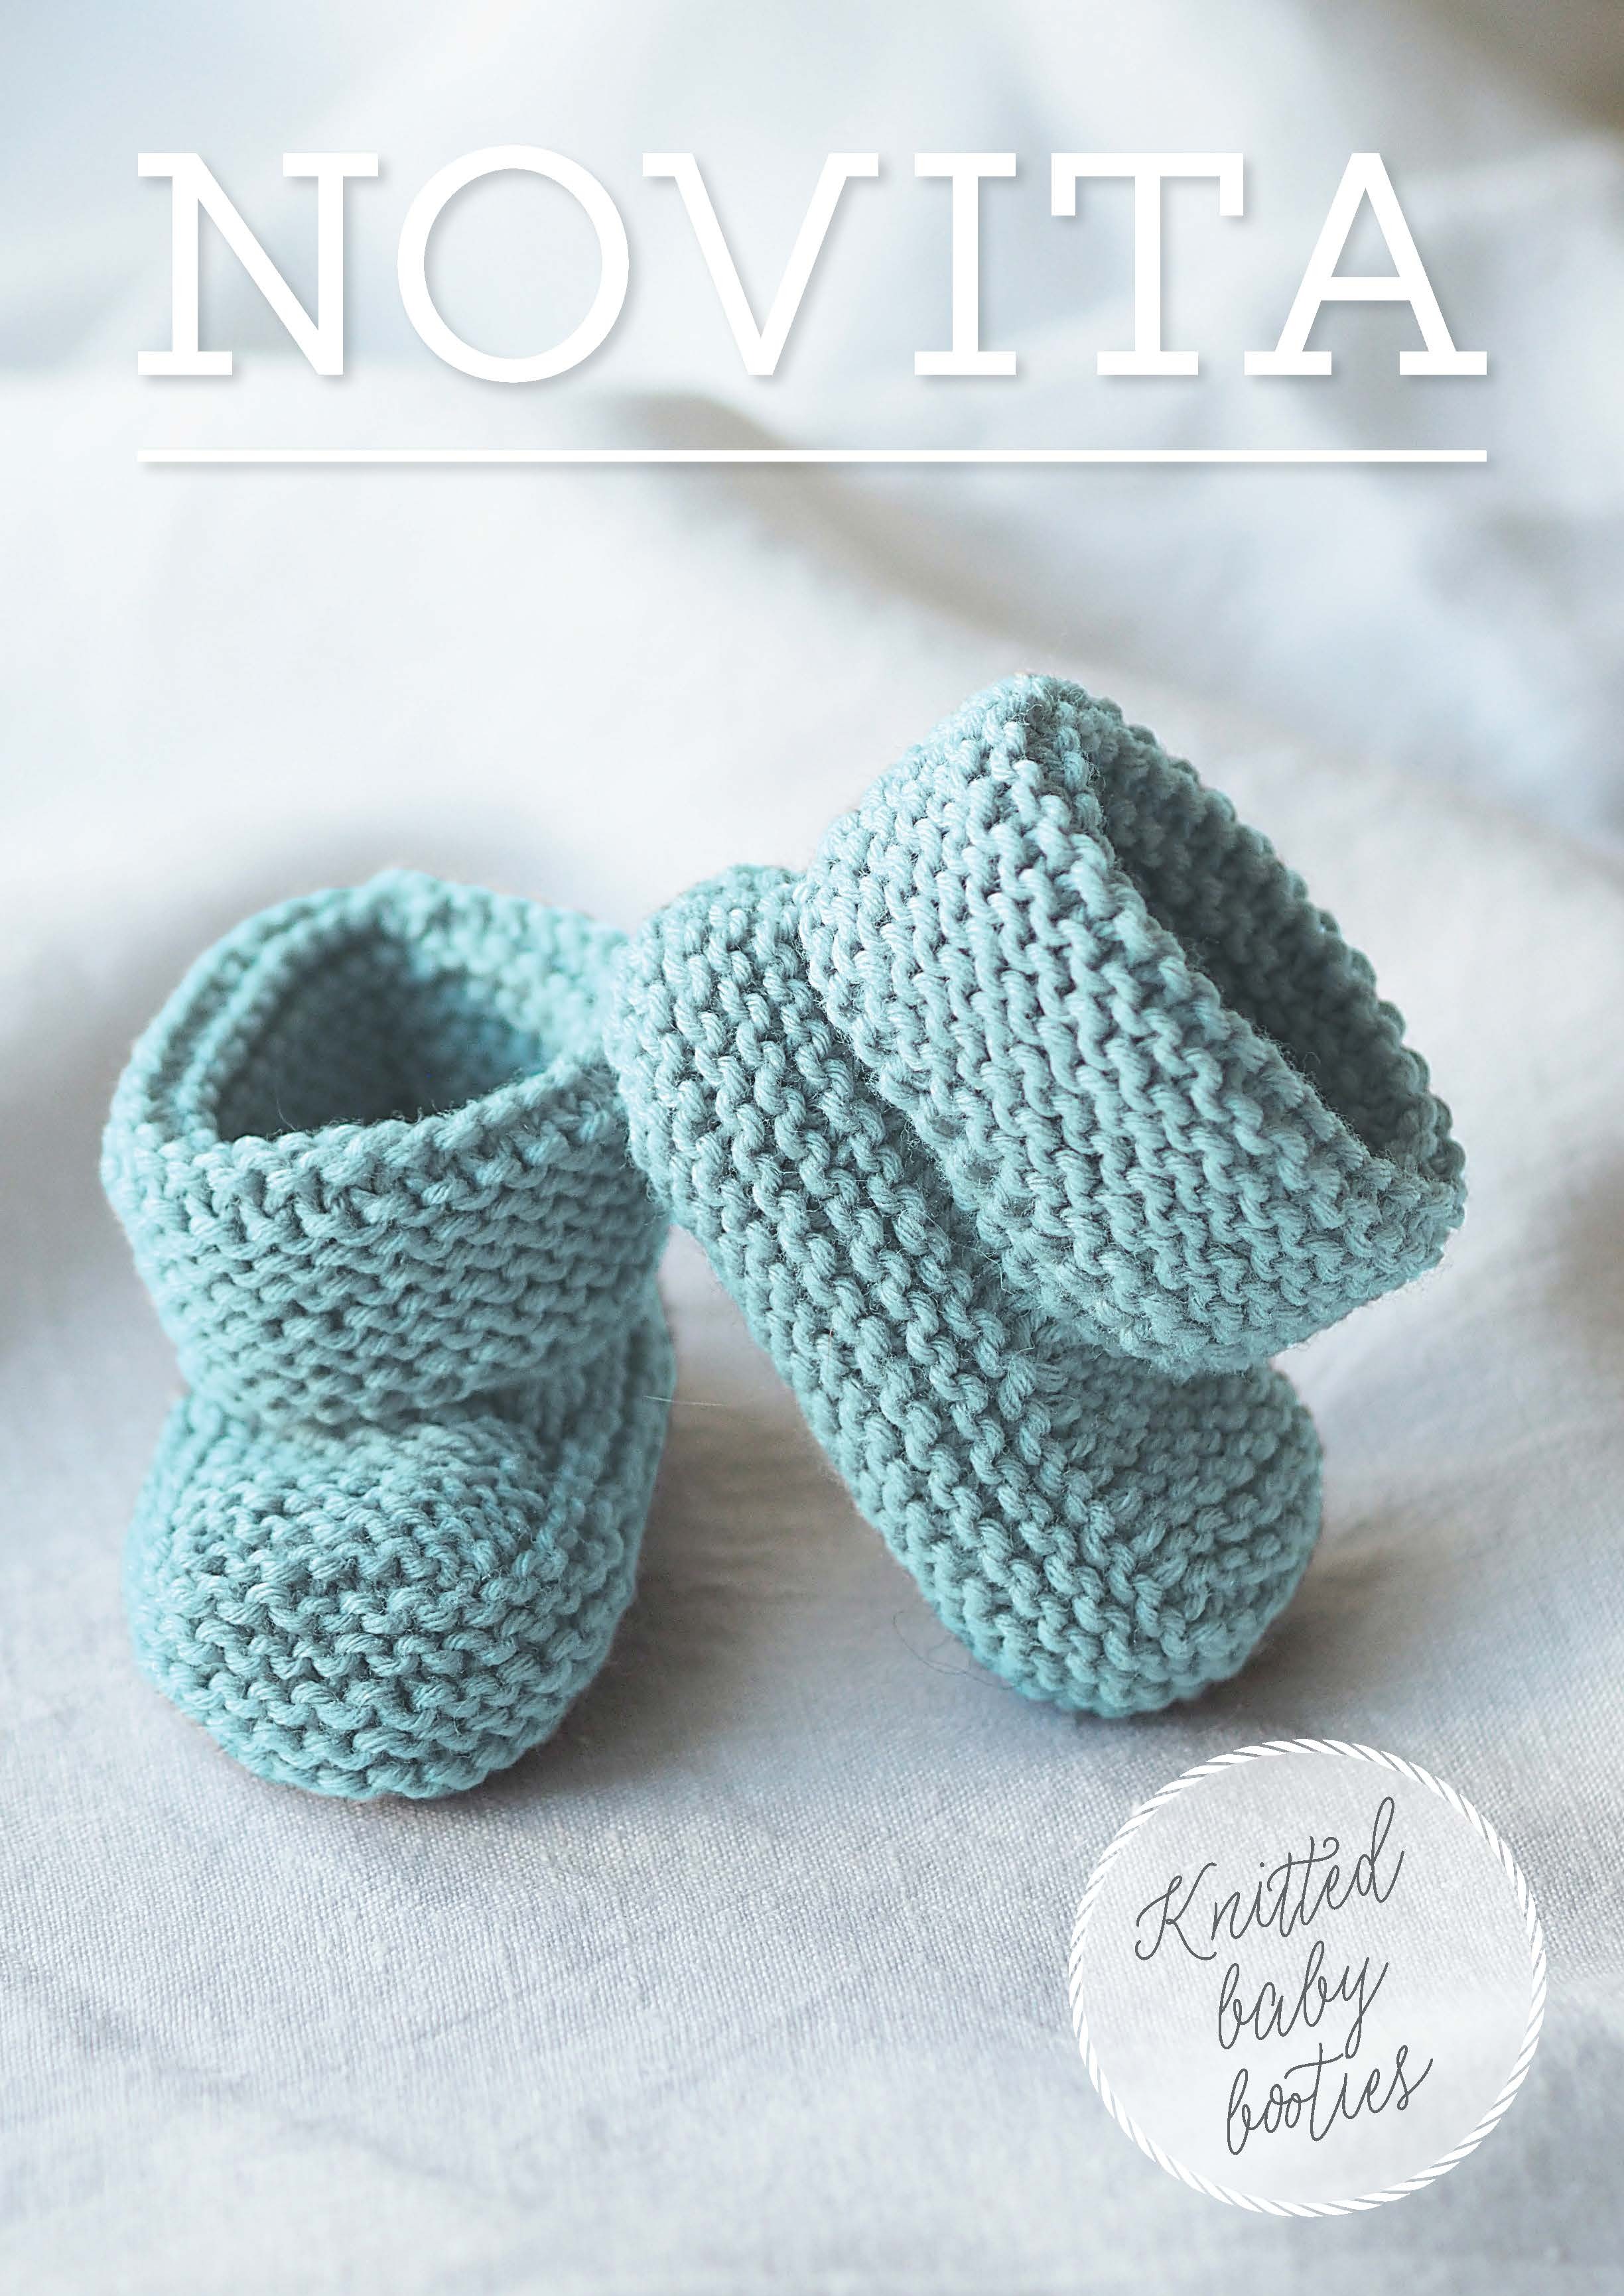 Crochet Bootees  Shoes 4 ply PDF instant download 18-22 inches Baby Knitted Dress PDF Baby Knitting & Crochet pattern